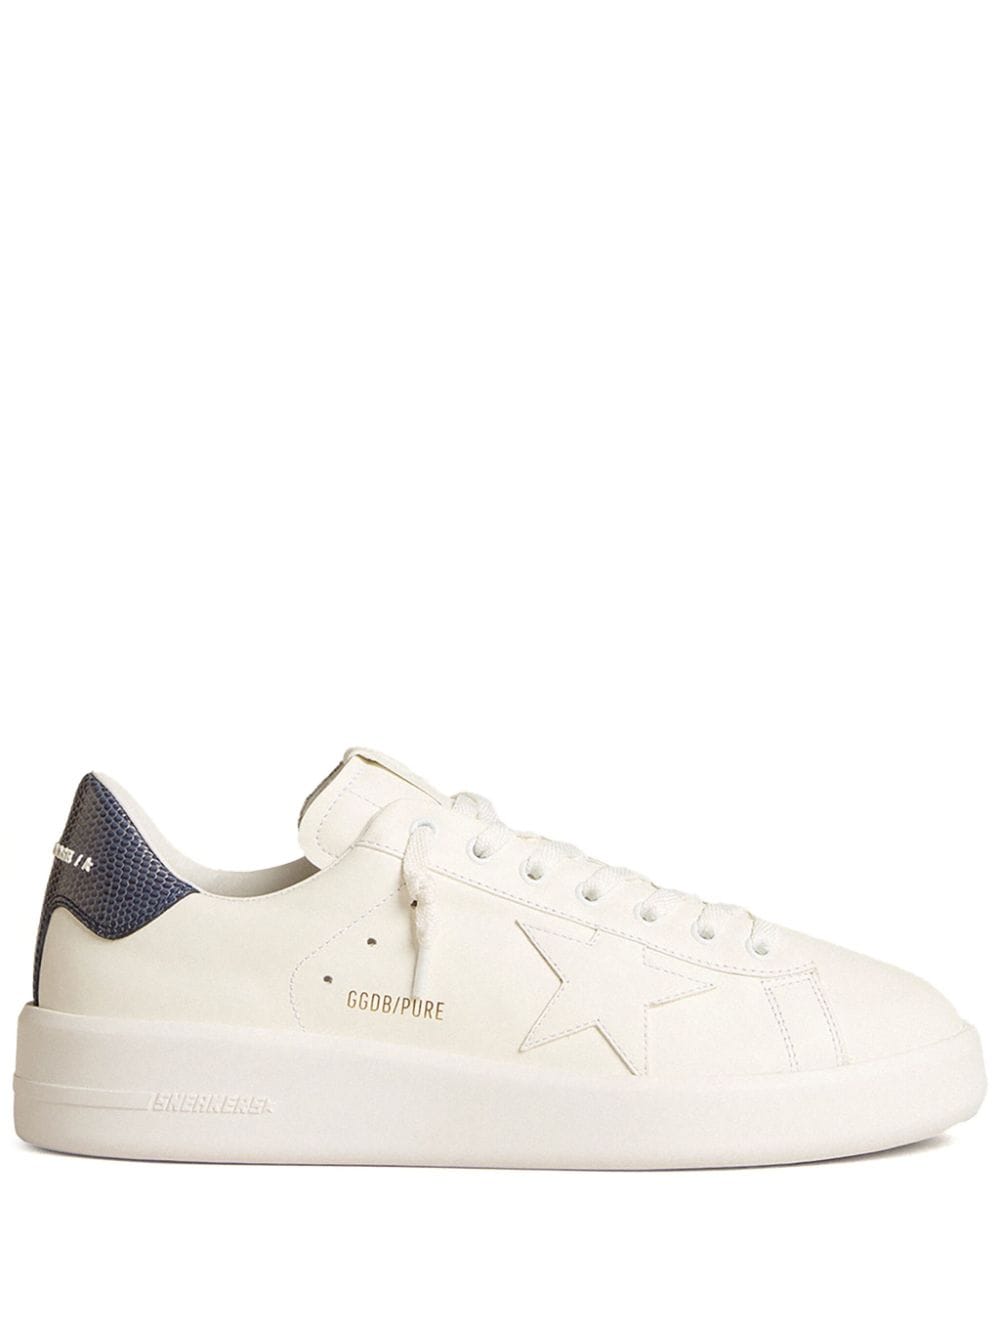 Golden Goose Purestar Leather Sneakers In Gold